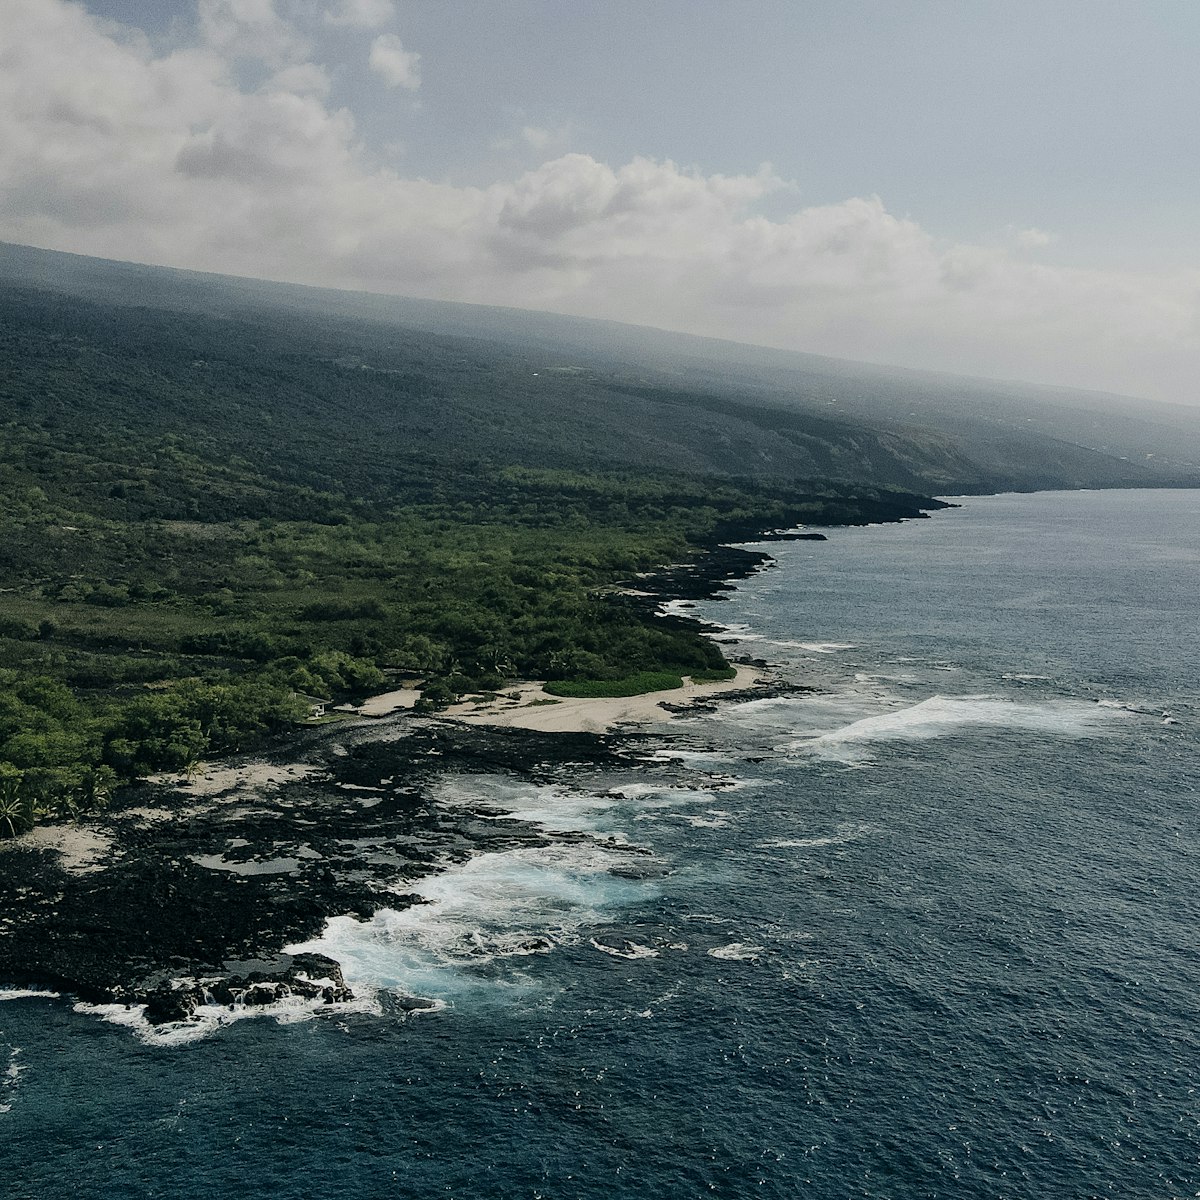 CAPTAIN COOK, HI, USA - DEC, 2020 Hookena Beach Park. aerial view from drone . High quality photo
1746913263
african american, beautiful, big island, black, caucasian, coast, grey sand, group, happy, holiday, landscape, mixed race, natural, ocean, ordinary people, outdoor, rugged, shore, tourists, tropical, u.s.a., vacation, wave, white, wild, hawaii, aerial